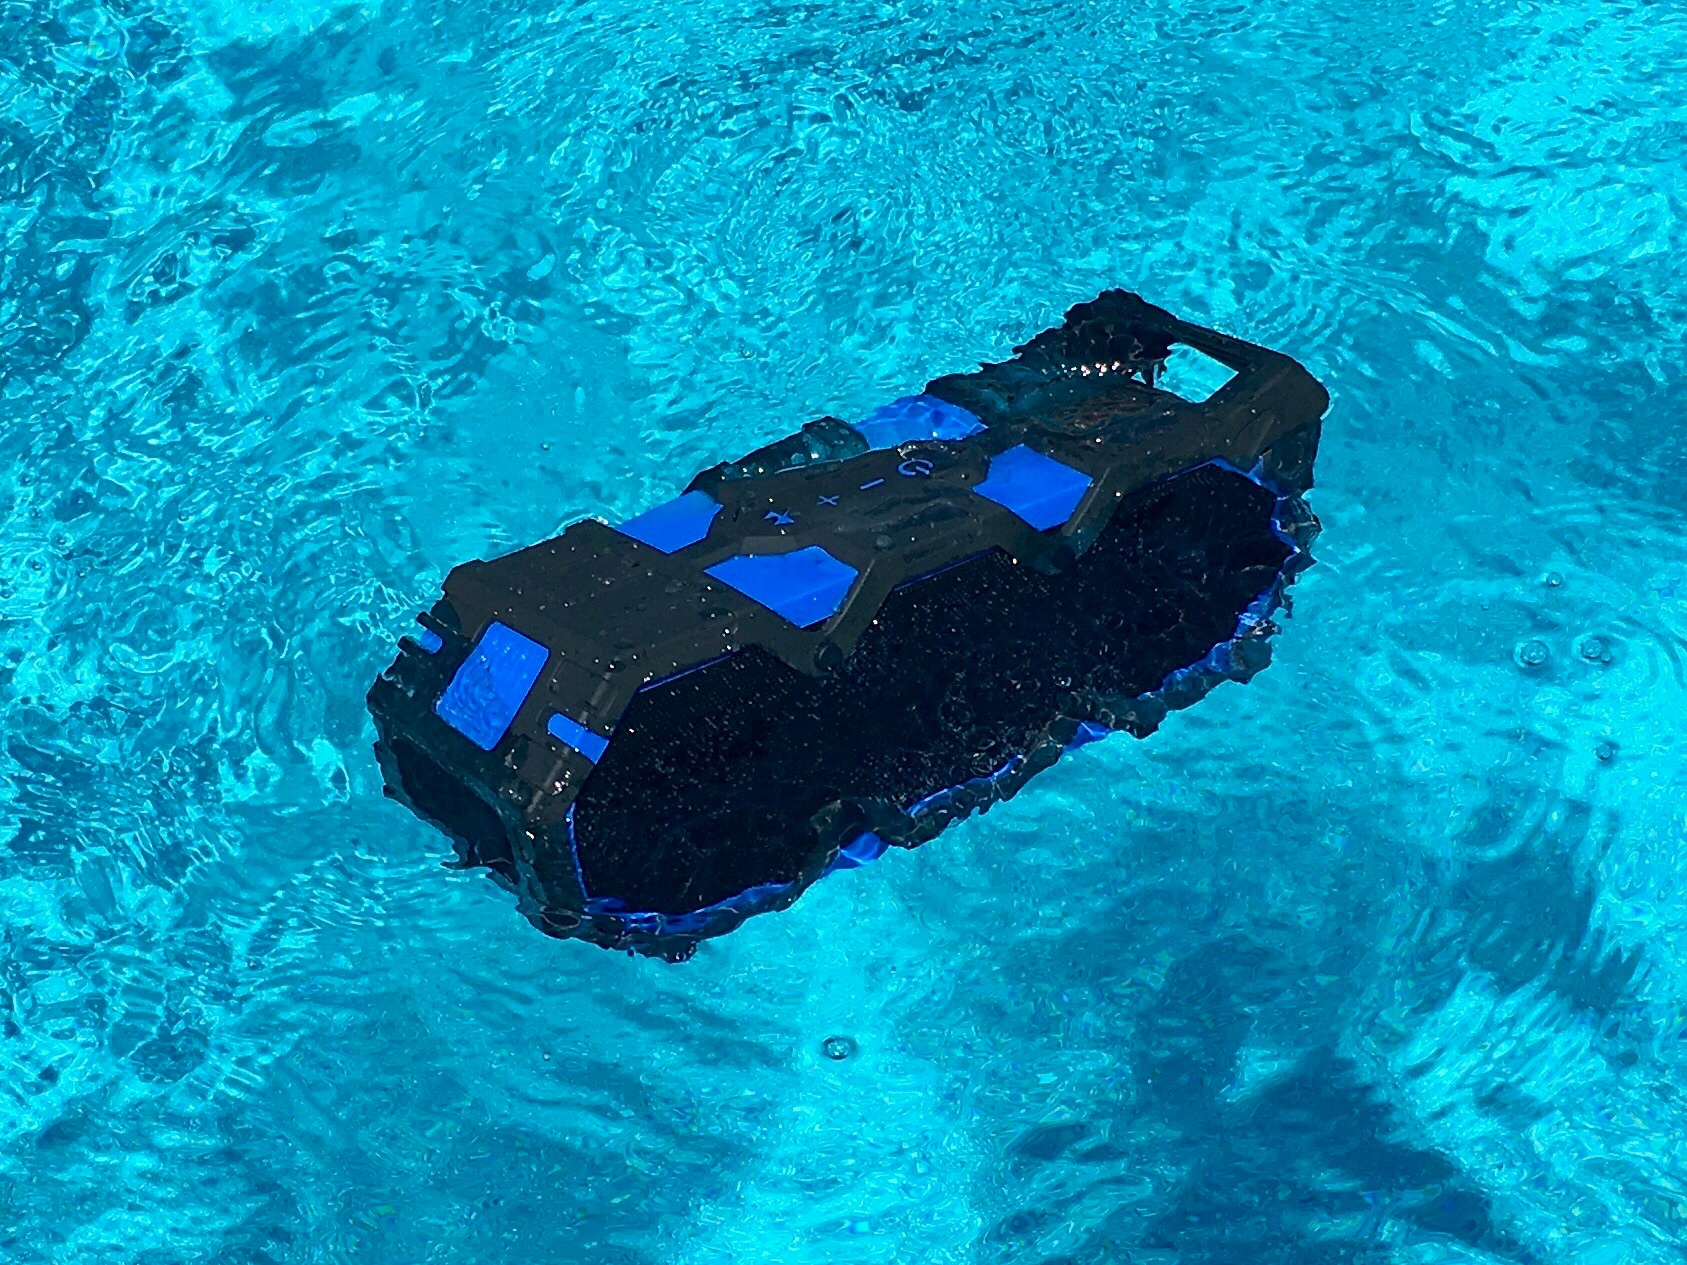 The Super Life Jacket is waterproof and it floats.